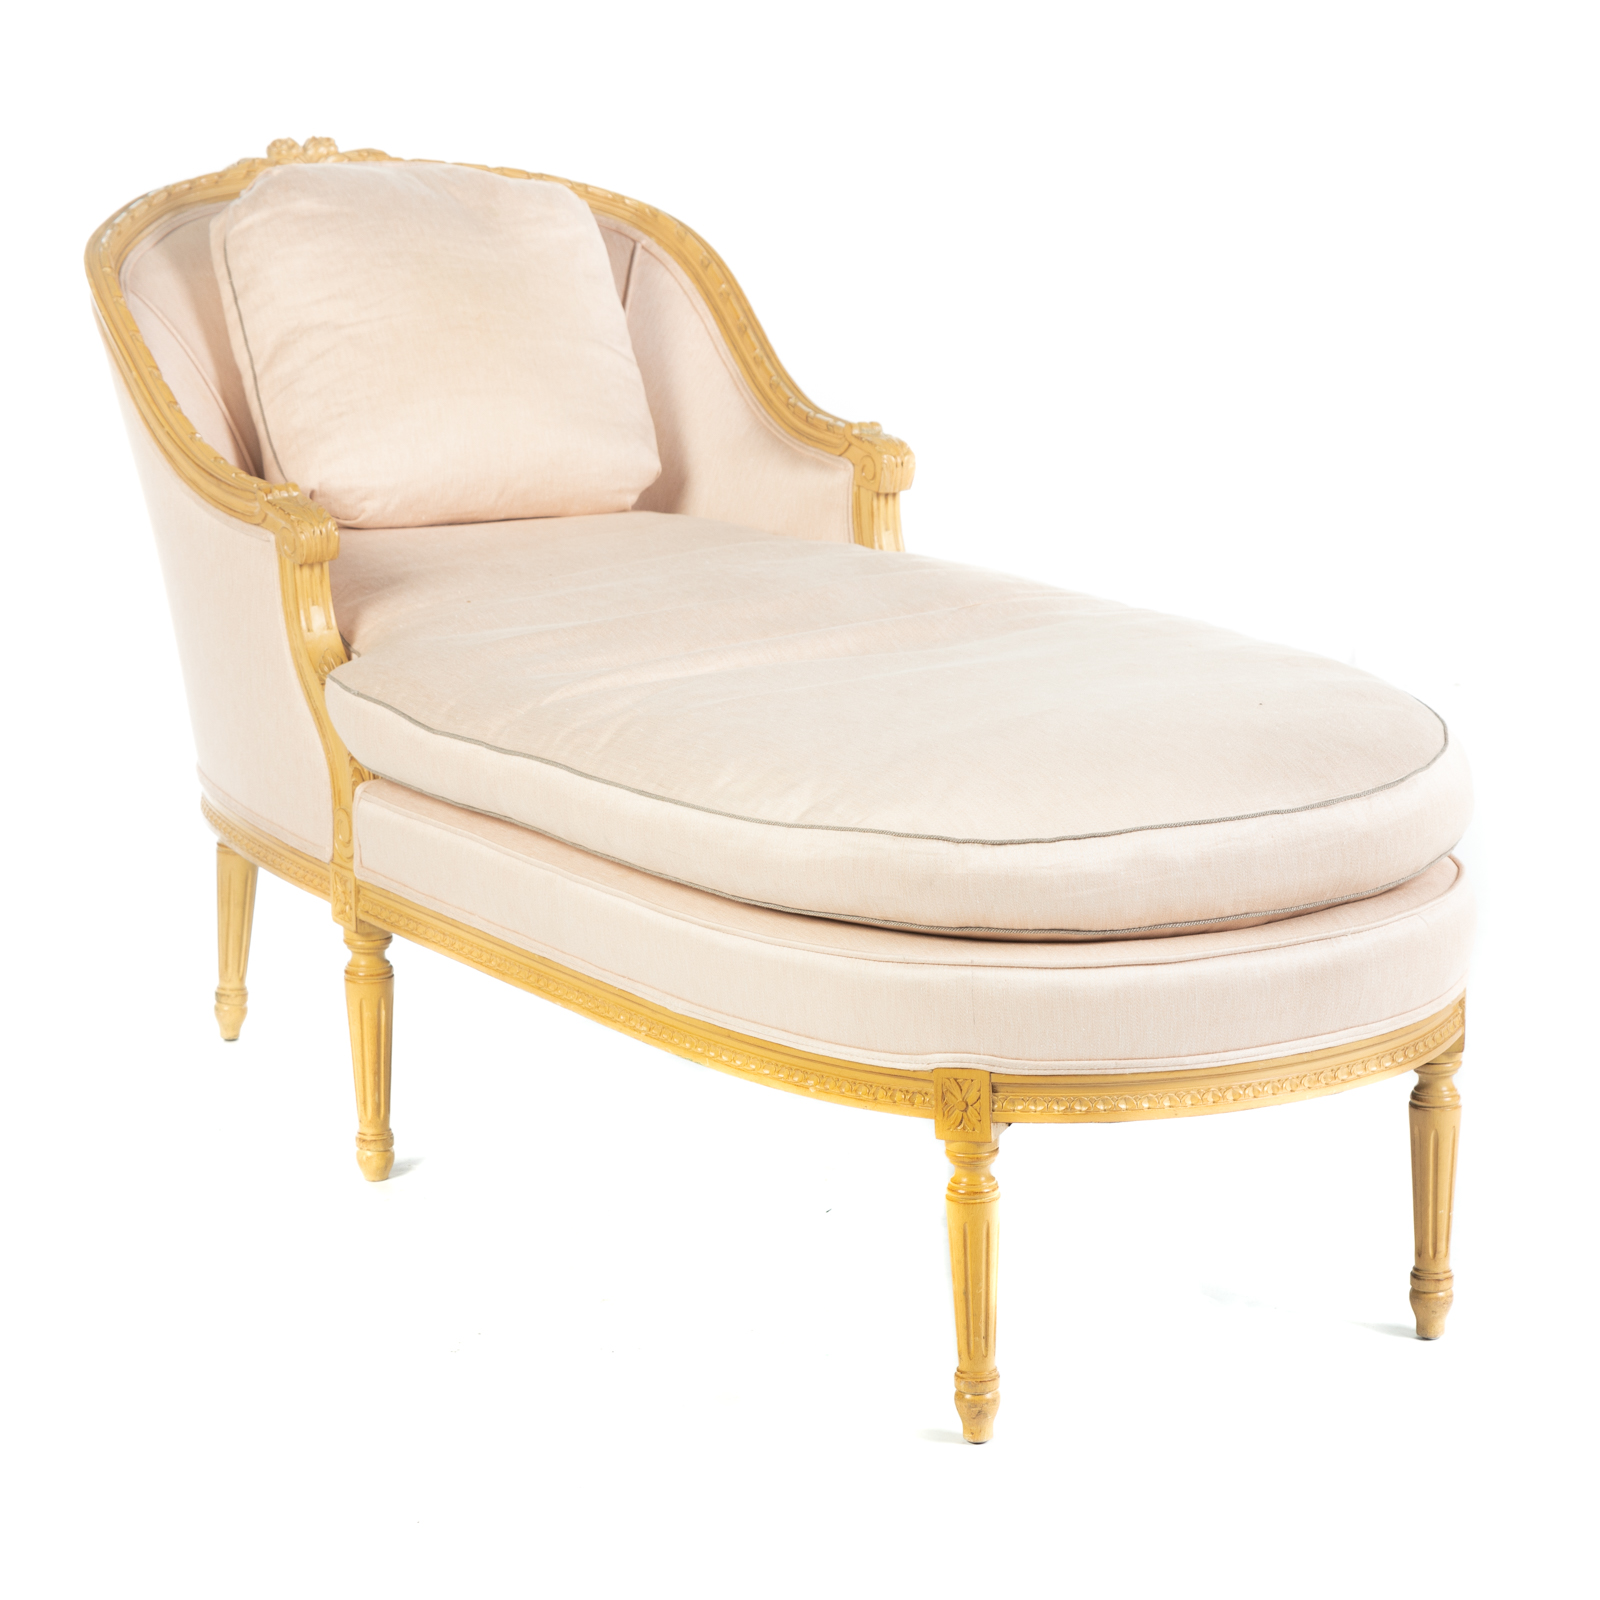 LOUIS XVI STYLE PAINTED WOOD CHAISE 36a9ca